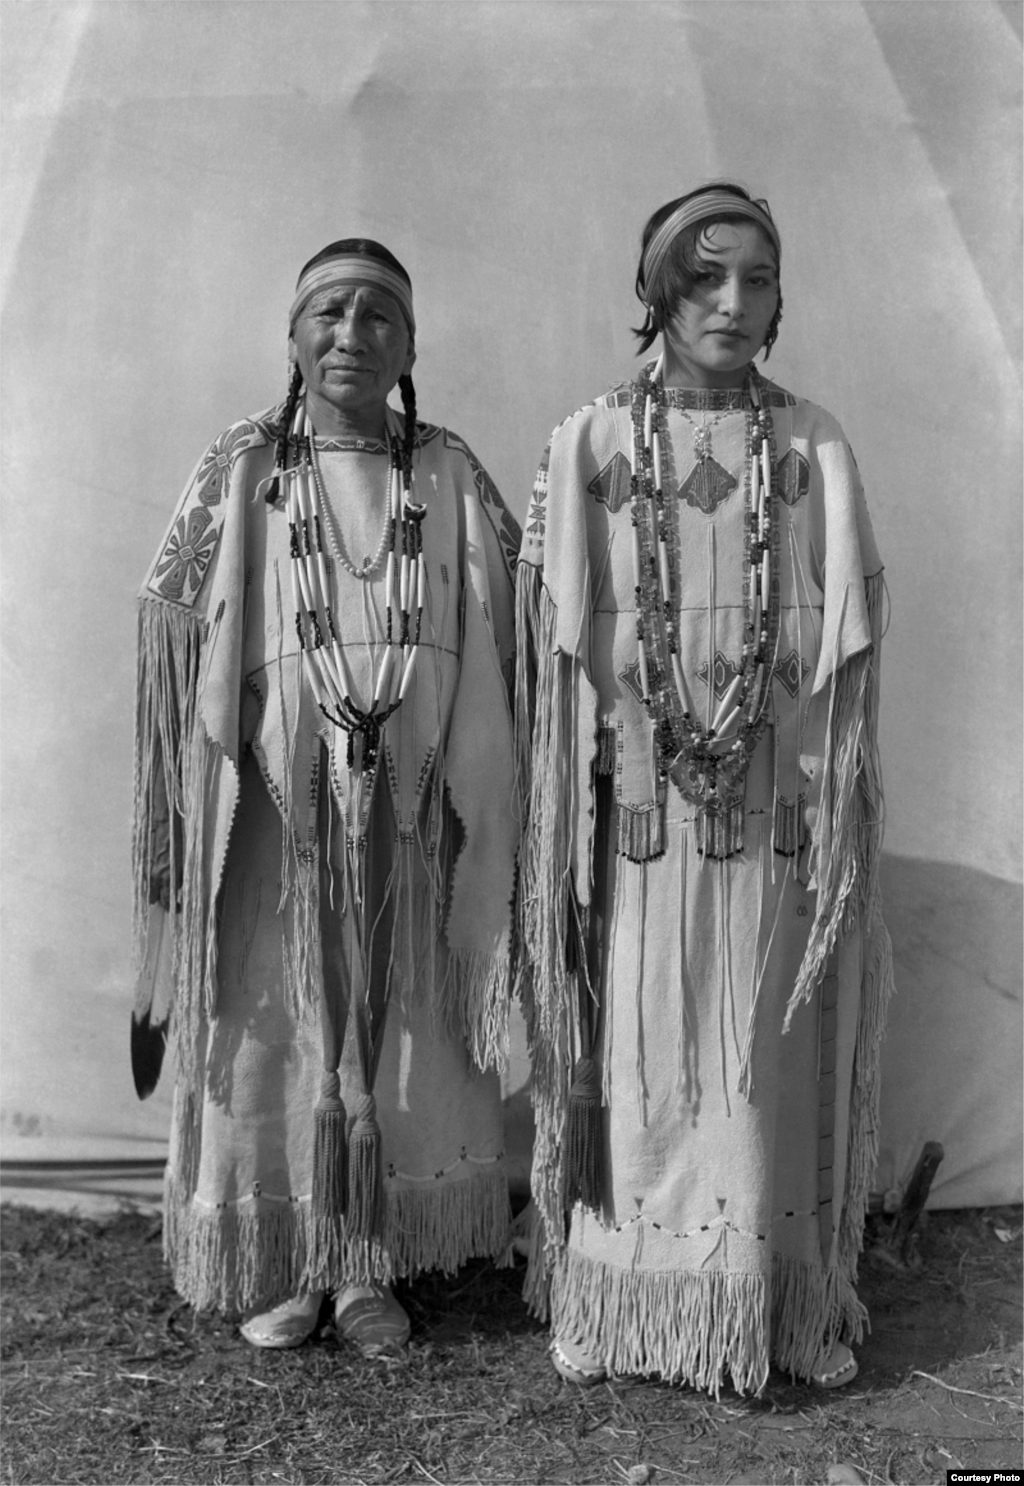 Left to right: Sindy Libby Keahbone (Kiowa) and Hannah Keahbone (Kiowa). Oklahoma City, Oklahoma, ca. 1930. 57PC2. © 2014 Estate of Horace Poolaw. Reprinted with permission.